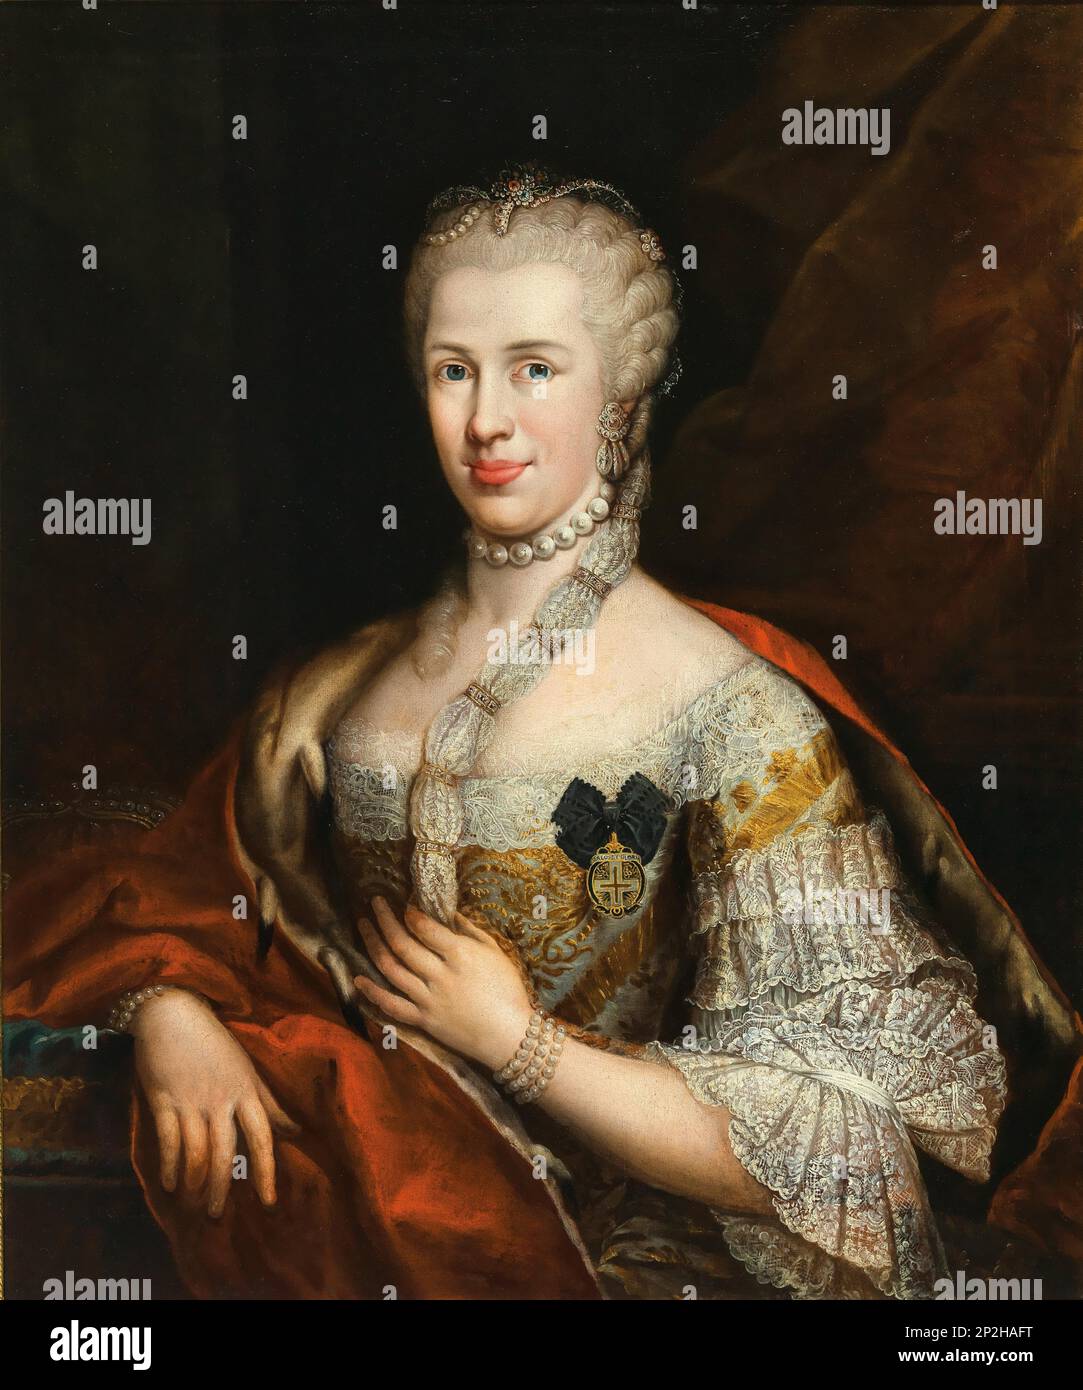 Portrait of Infanta Maria Luisa of Spain (1745-1792), Holy Roman Empress, with the Star Cross Order. Private Collection. Stock Photo